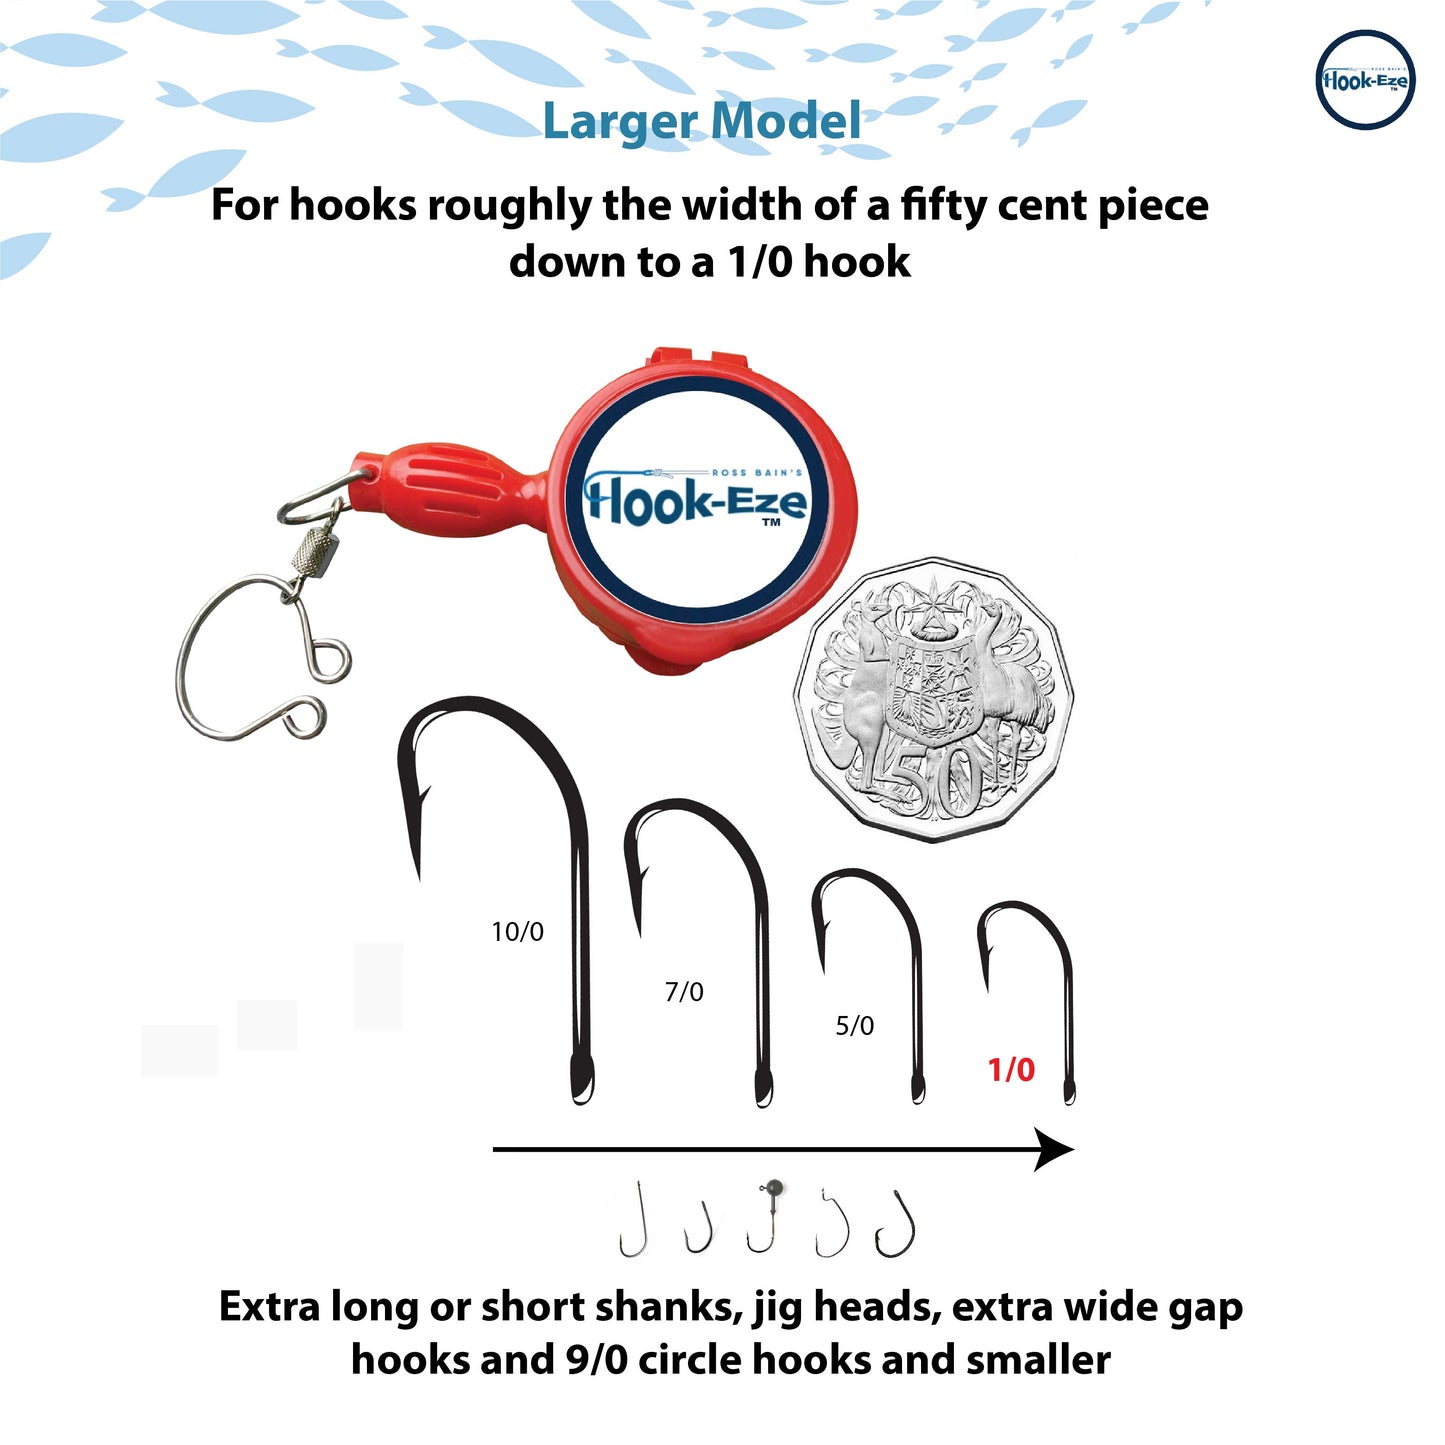 Hook-Eze 3x Large Knot Tying Tool Cover 6 Fishing Rods